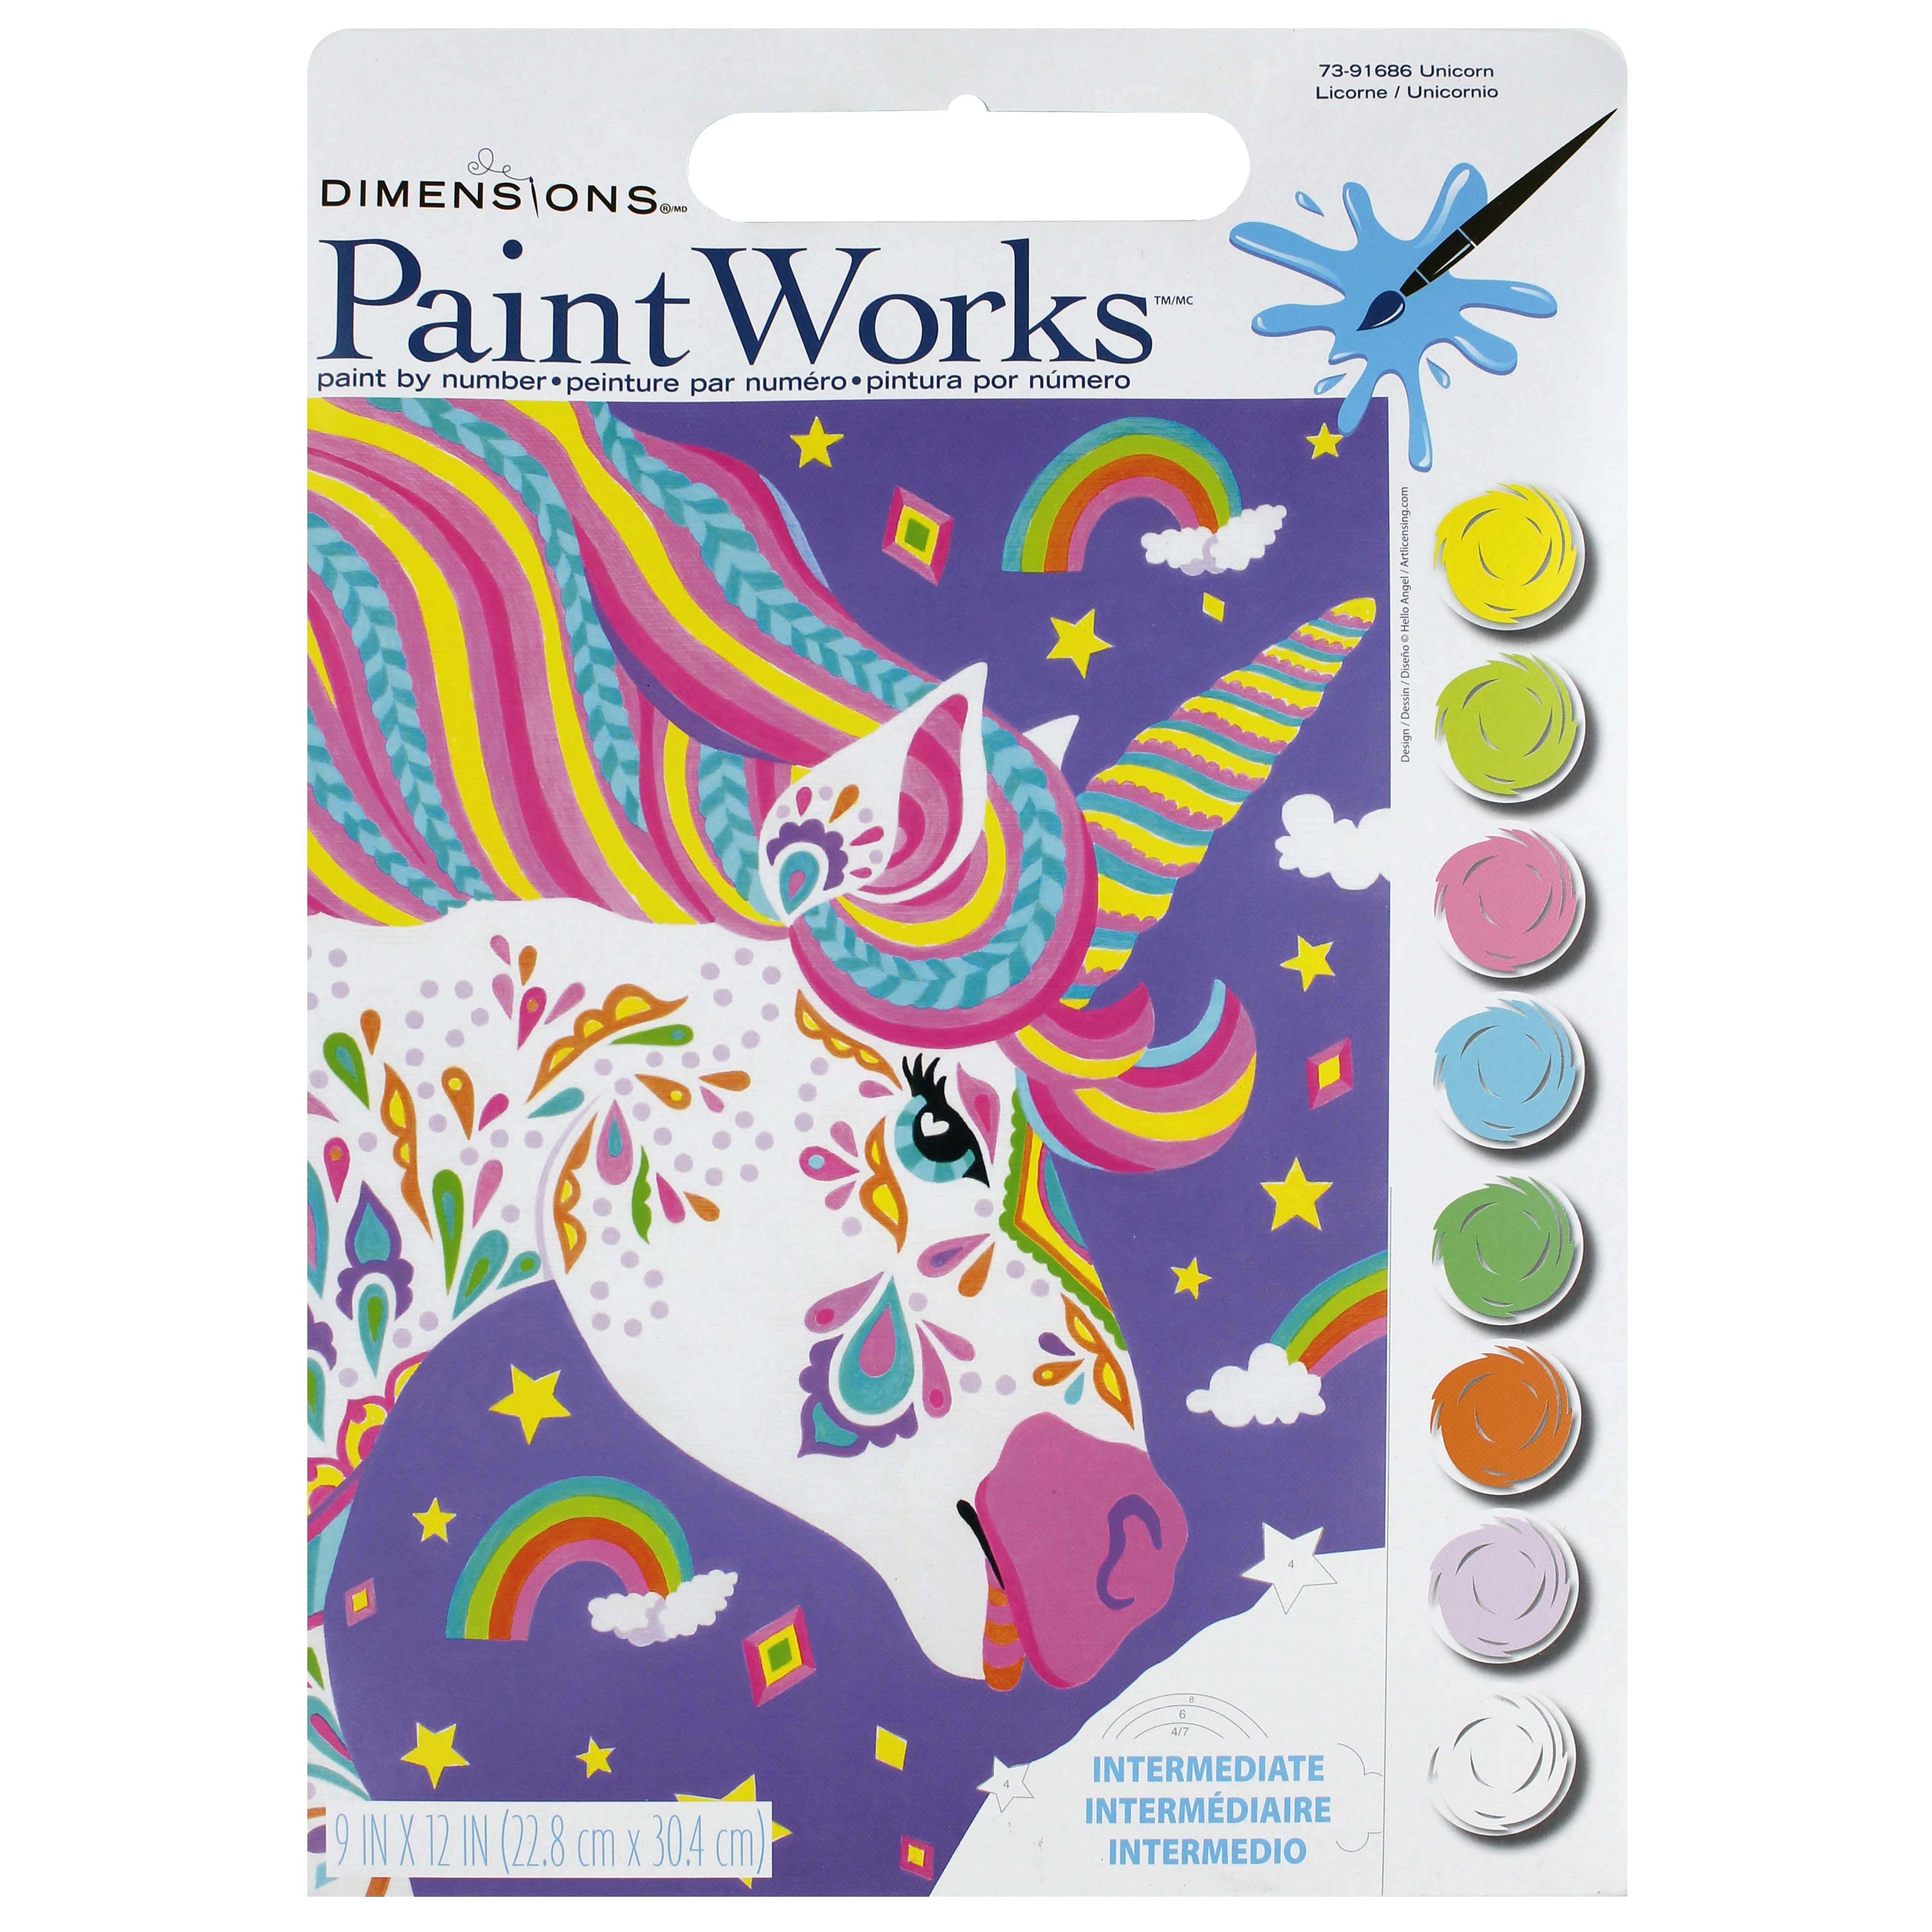 DIMENSIONS PAINTWORKS PAINT BY NUMBERS KITS